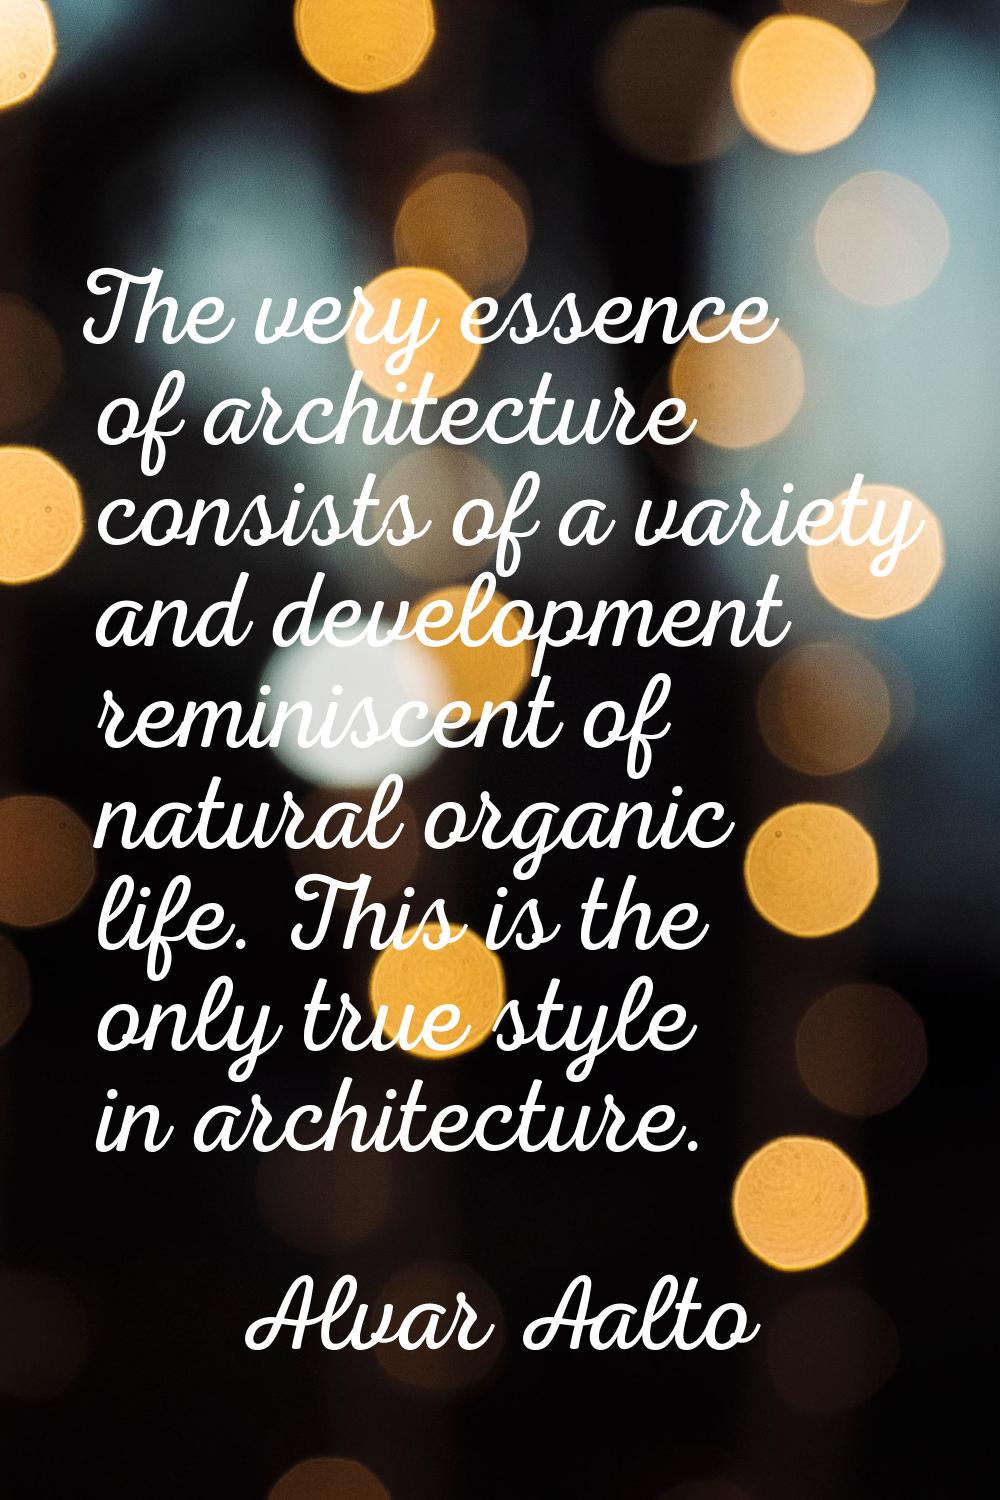 The very essence of architecture consists of a variety and development reminiscent of natural organ